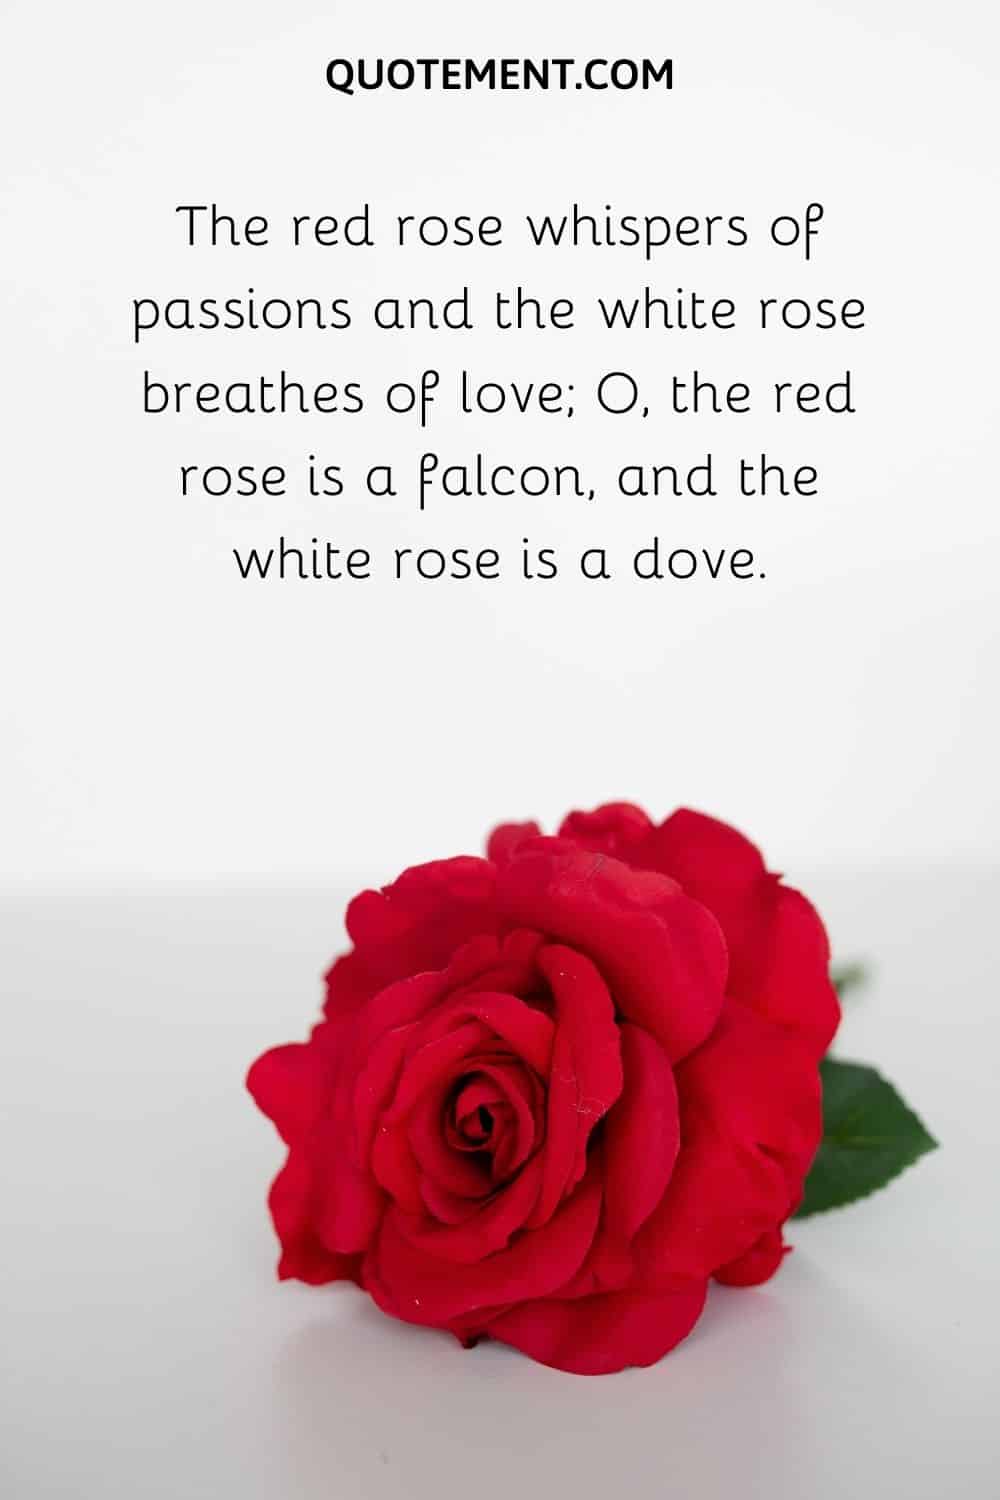 The red rose whispers of passion